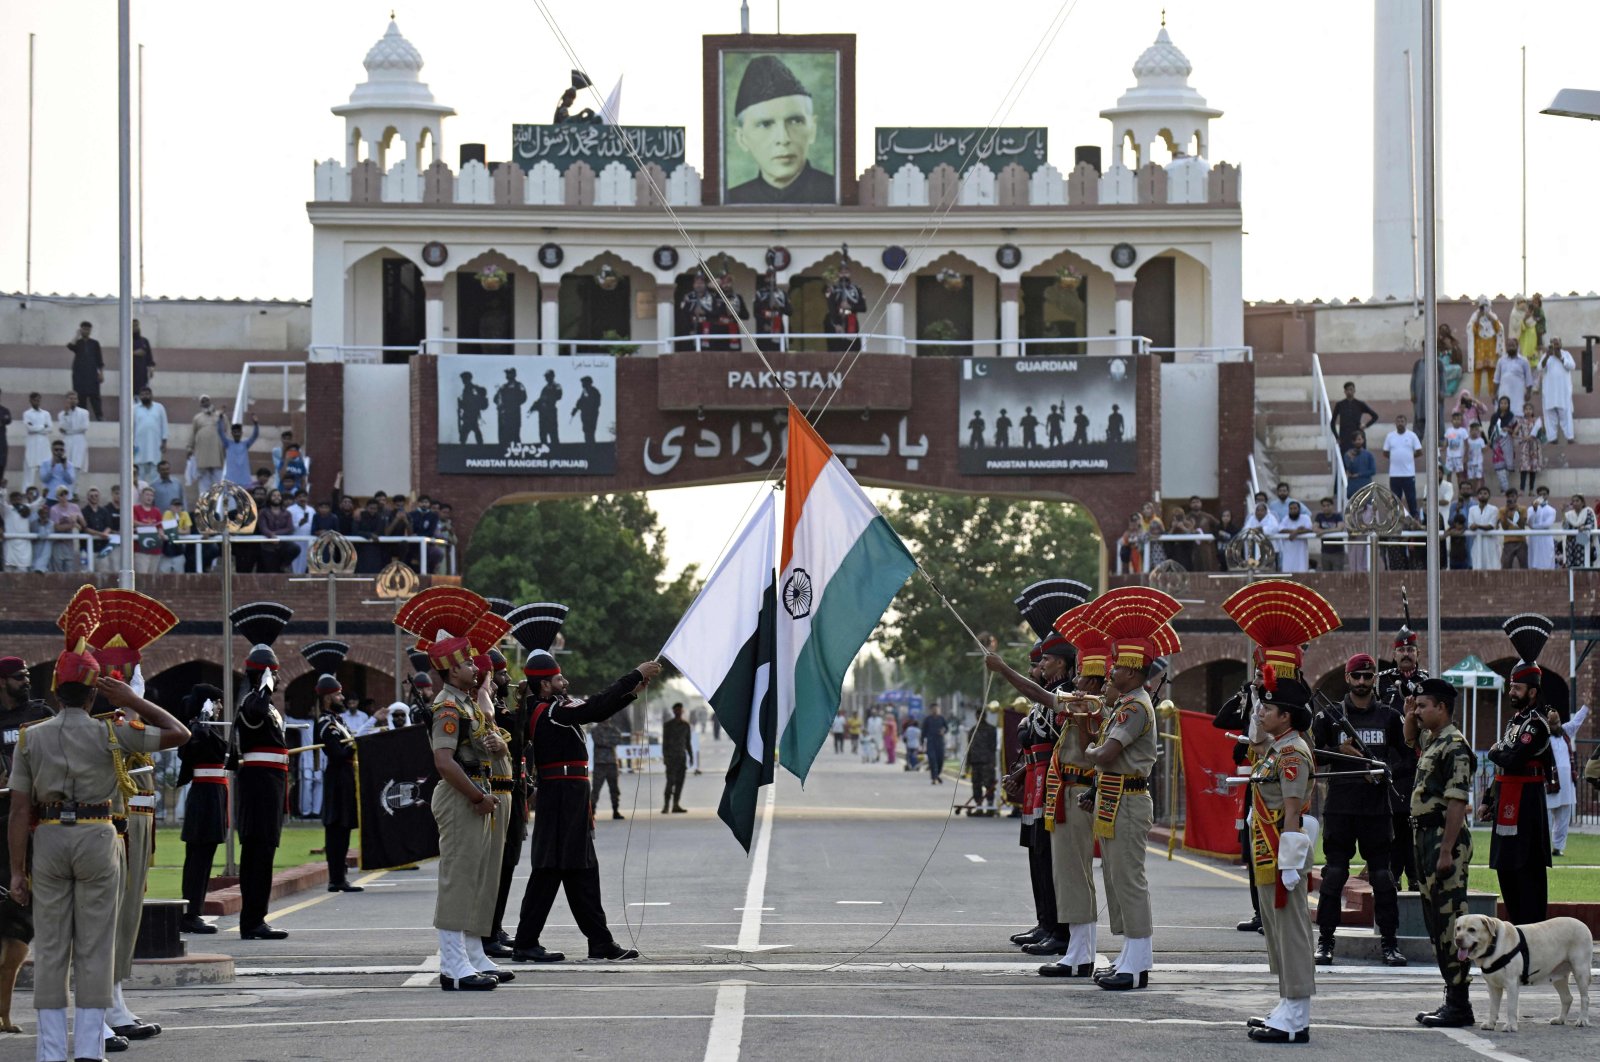 Indian Border Security Force (BSF) soldiers (in brown) and Pakistani Rangers take part in the Beating the Retreat ceremony at the India-Pakistan Wagah border post, Amritsar, India, Aug. 1, 2022. (AFP Photo)